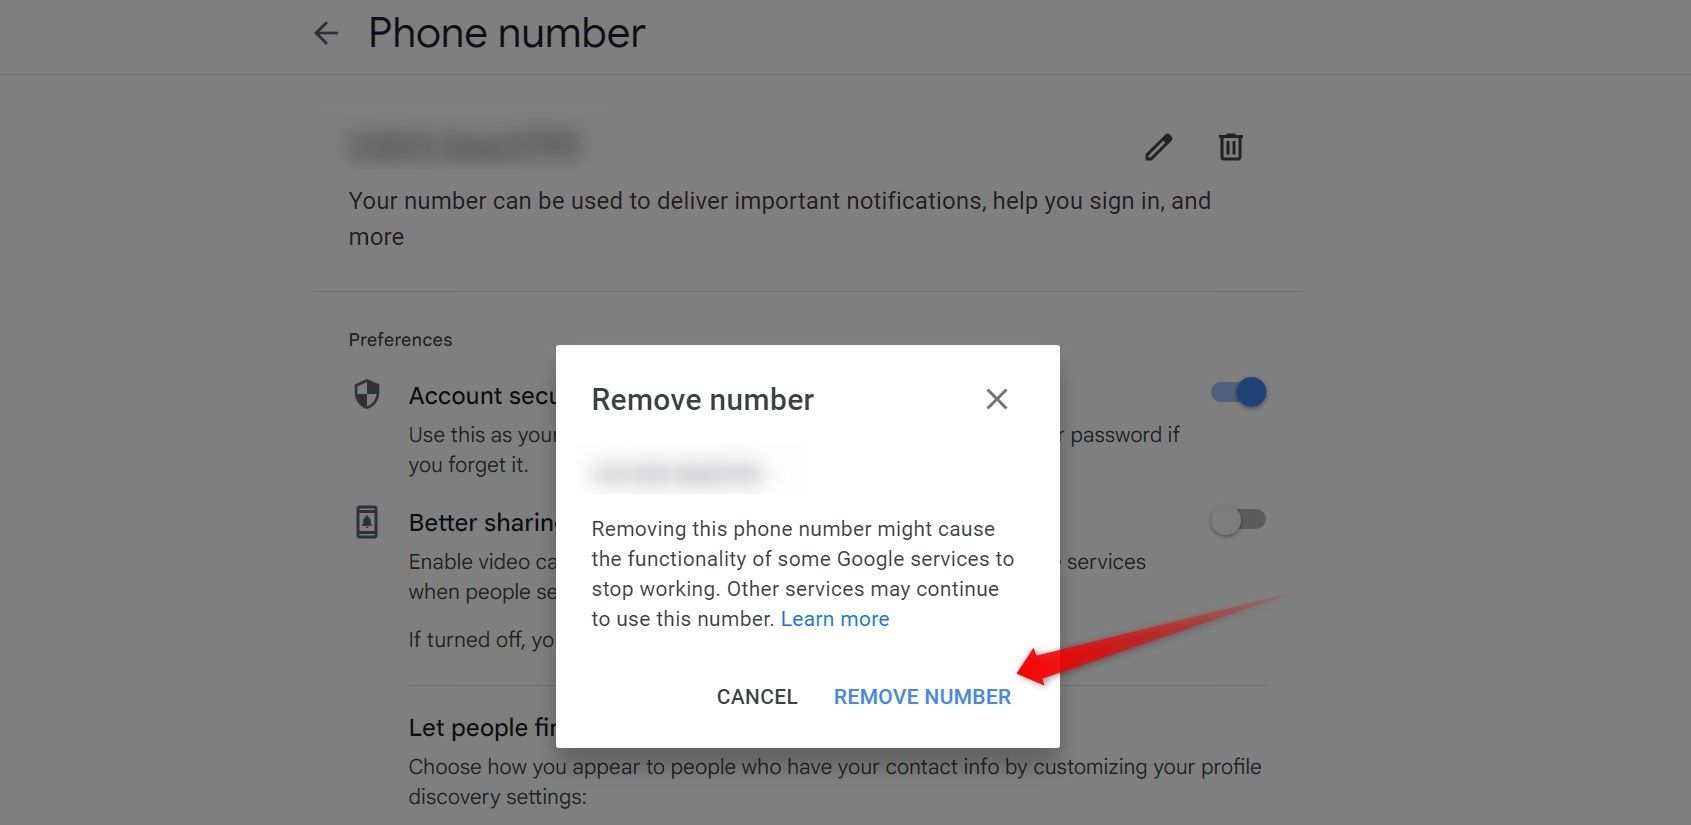 Confirming to remove the phone number from the popup